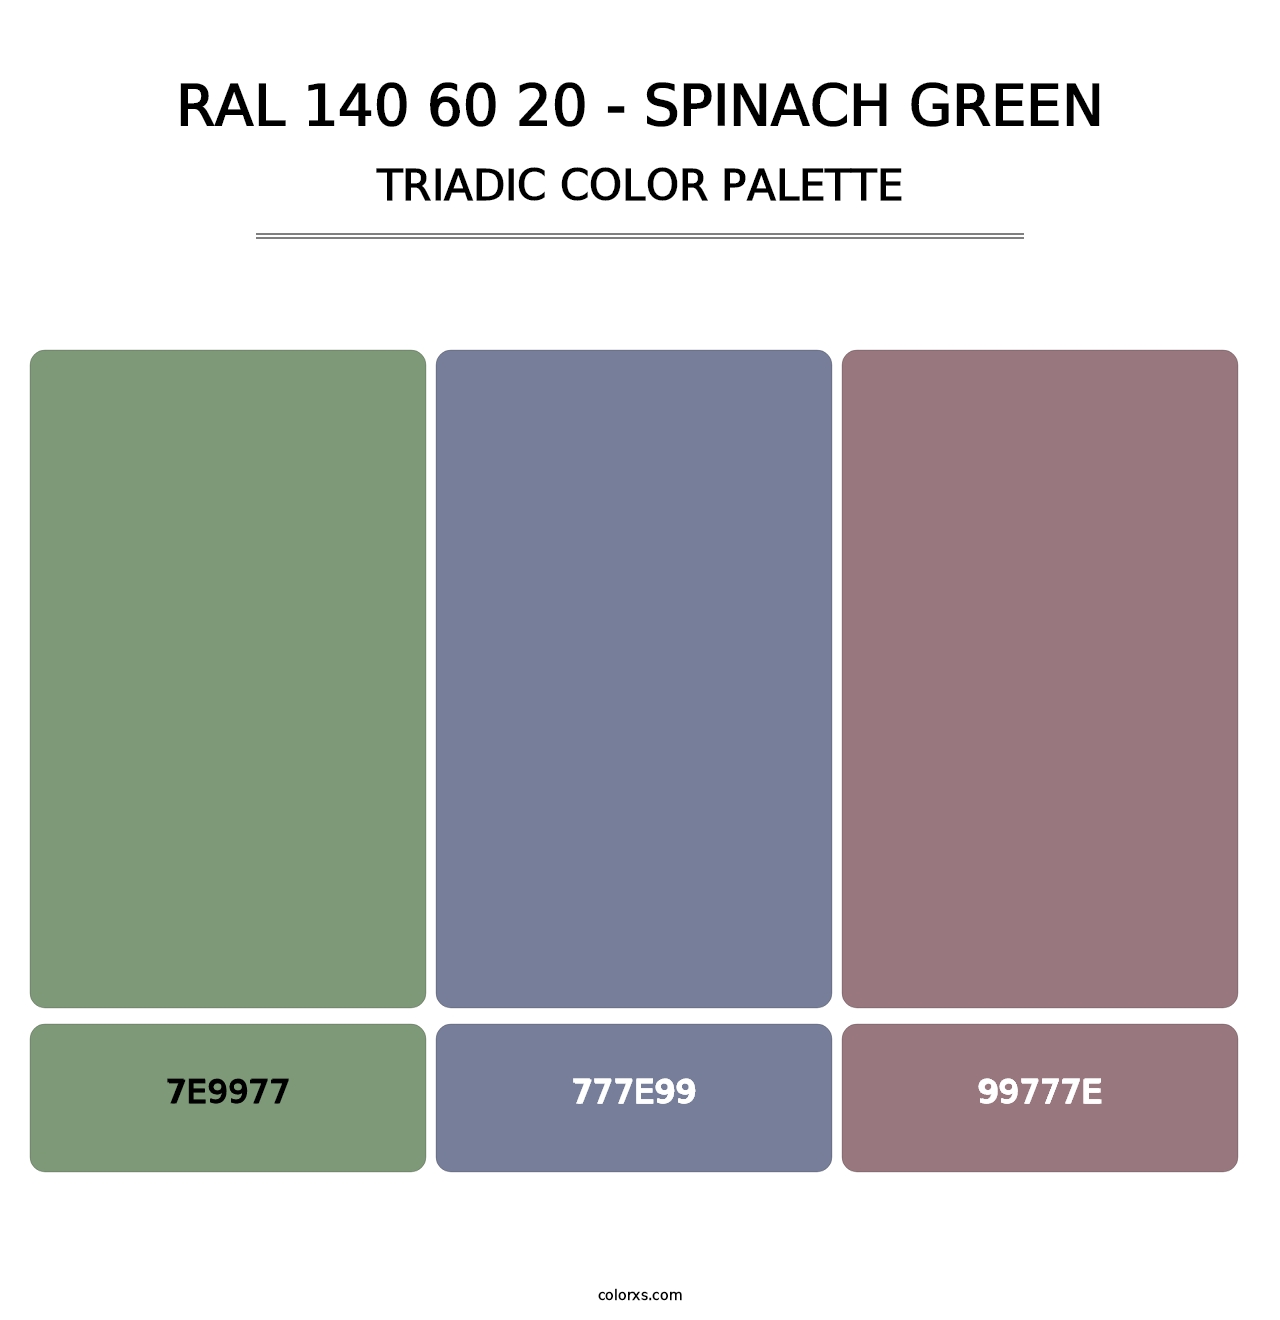 RAL 140 60 20 - Spinach Green - Triadic Color Palette